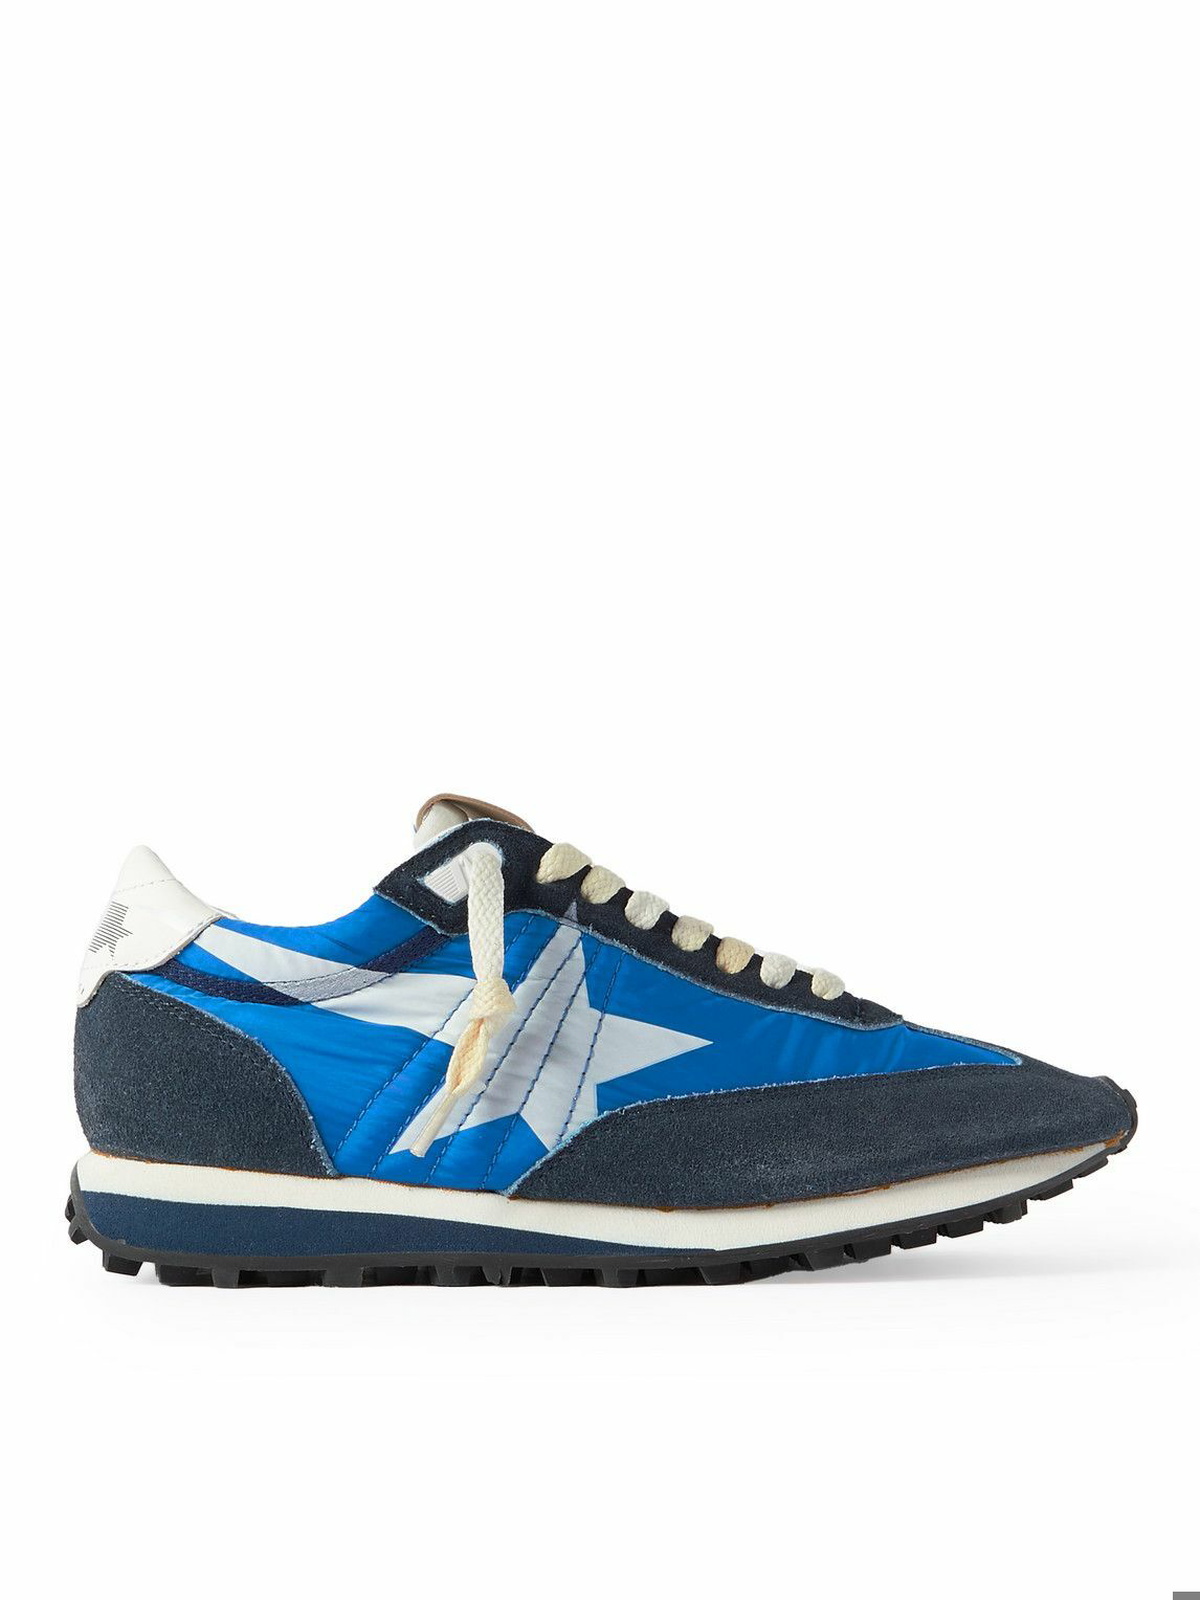 Golden Goose - Marathon Leather and Suede-Trimmed Nylon Sneakers - Blue ...